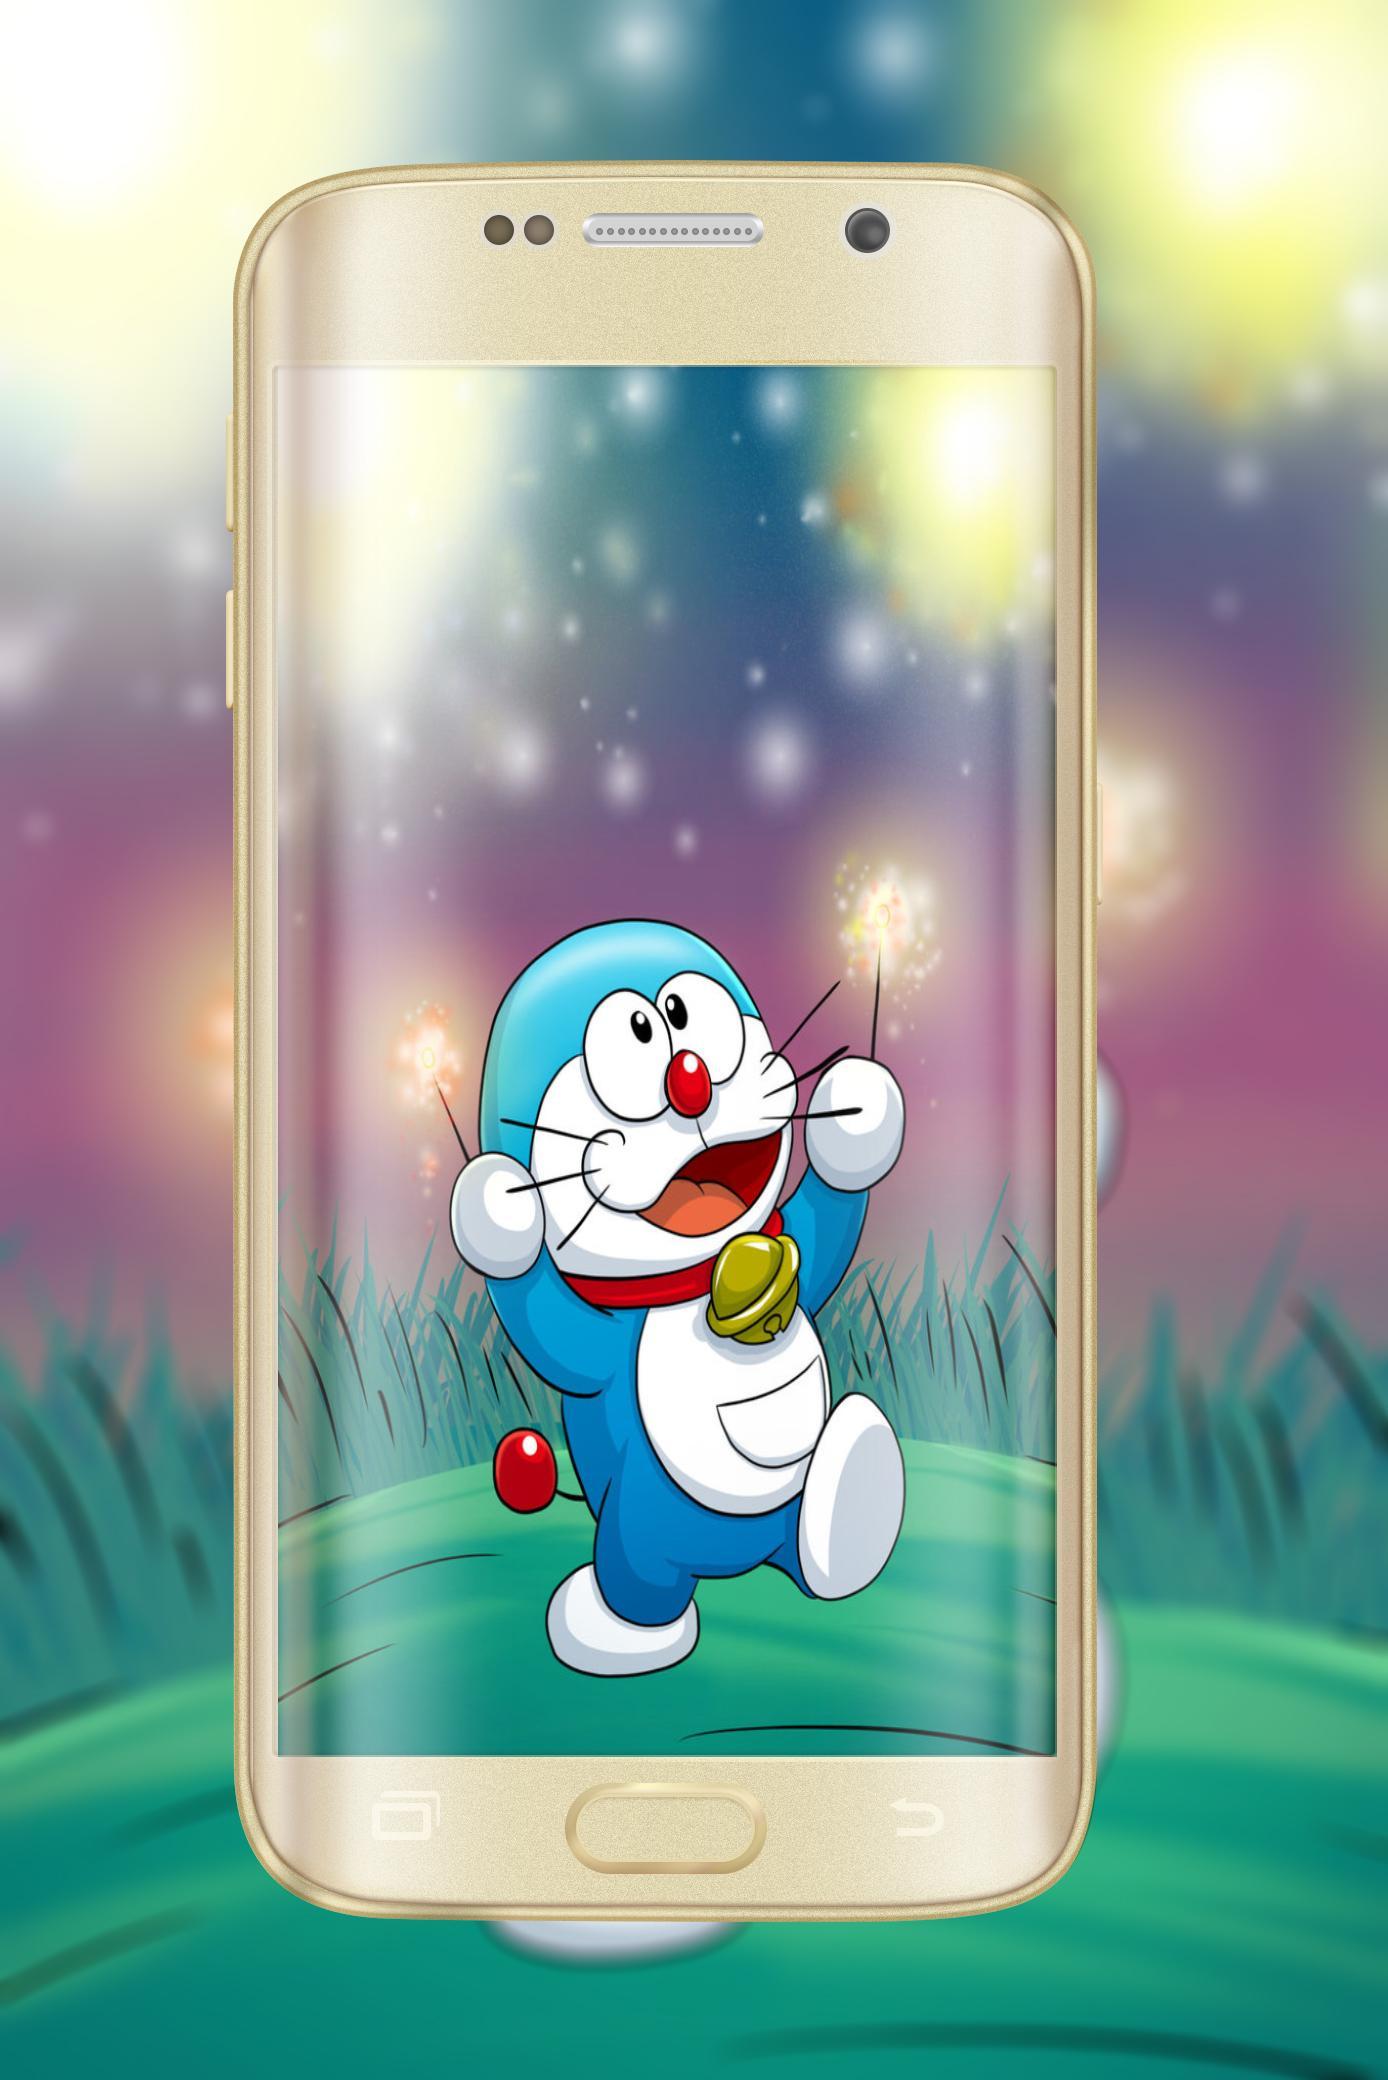 Doraemon Live Wallpapers Hd For Android Apk Download